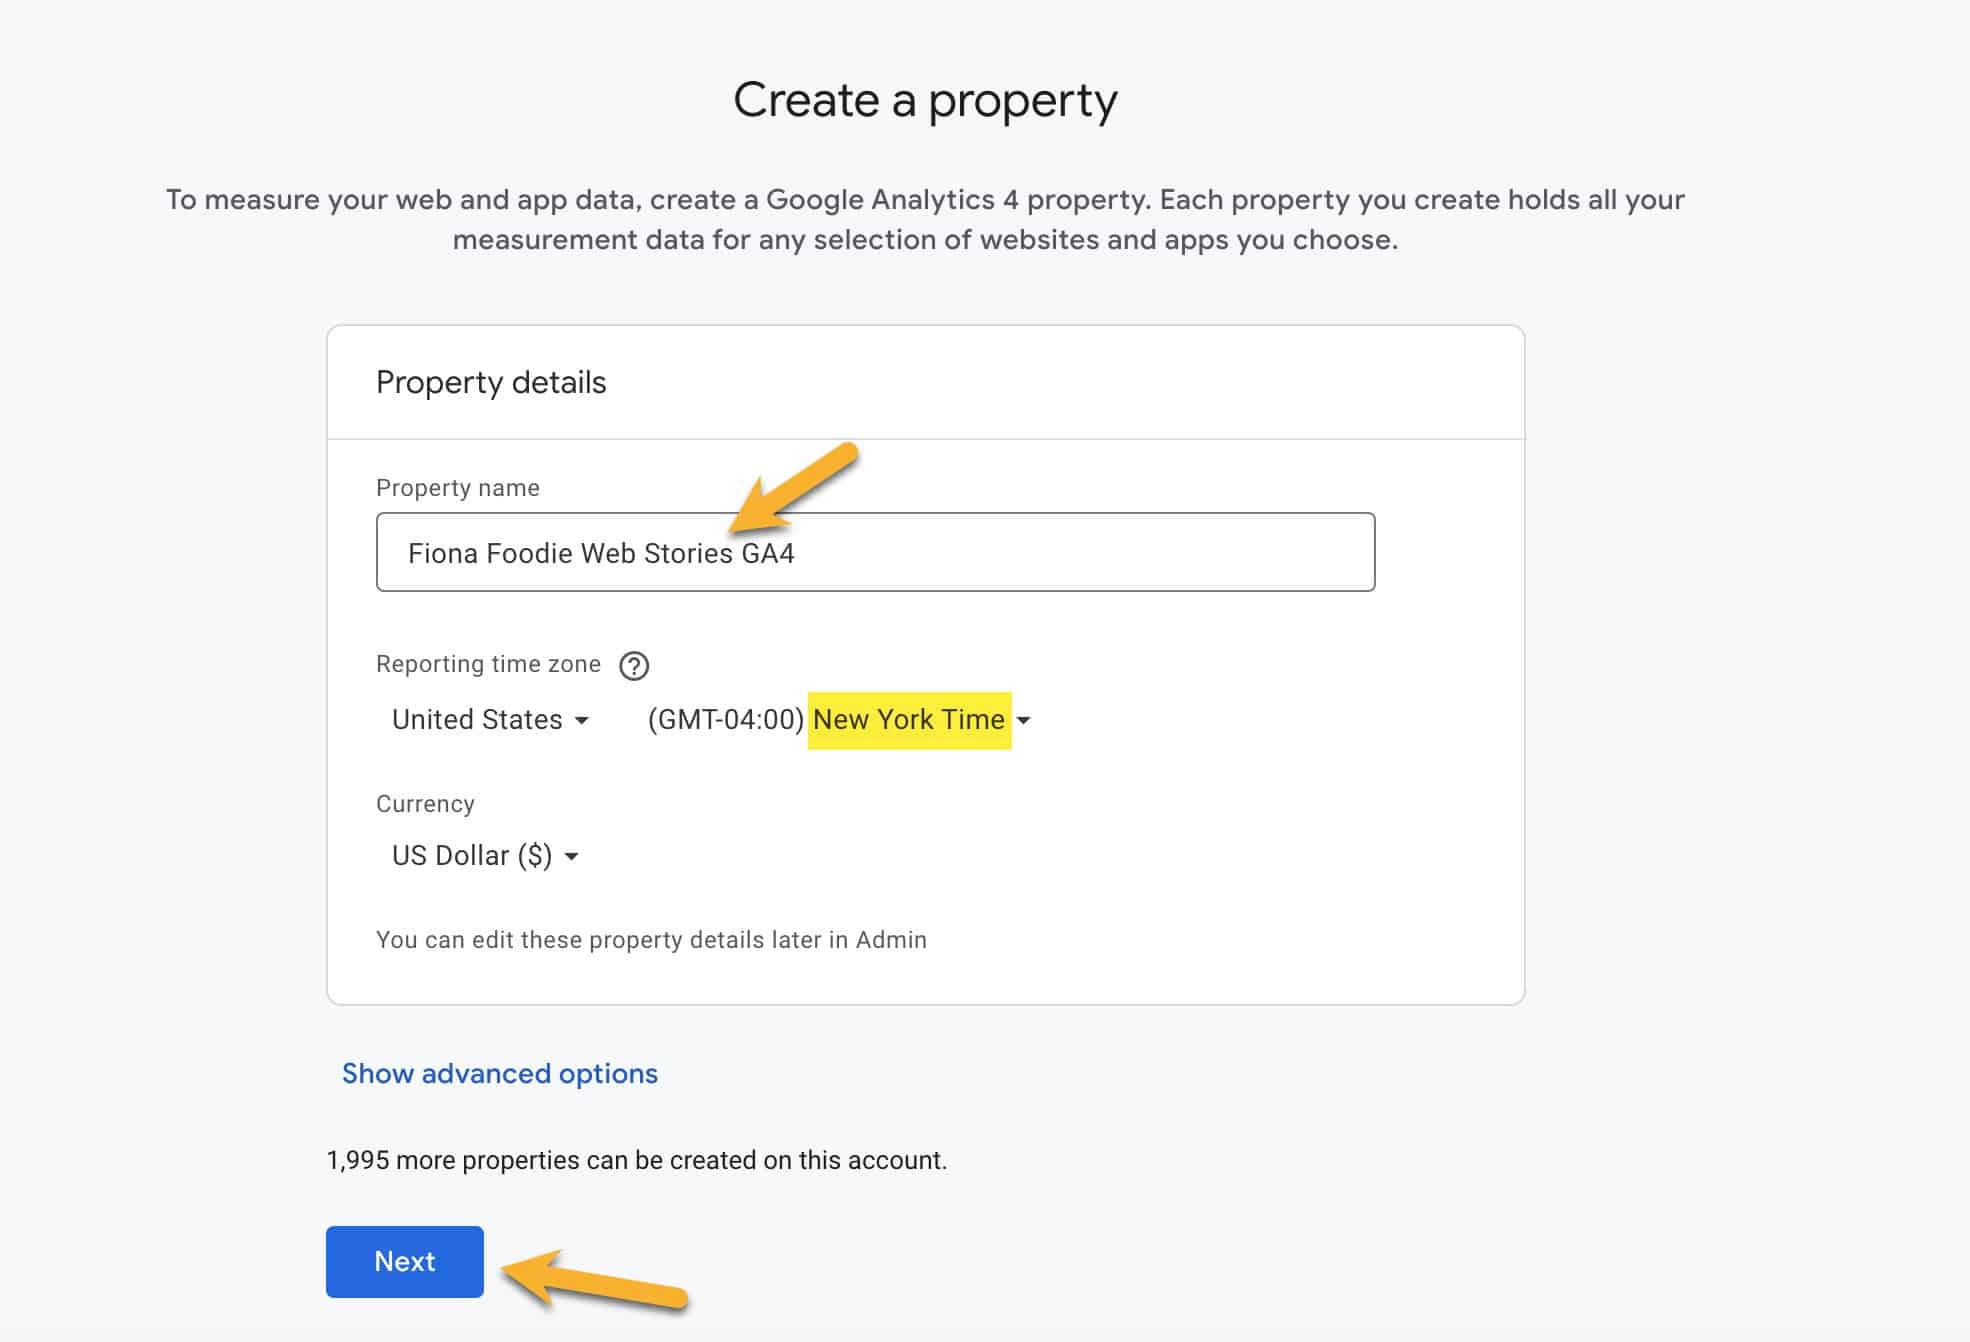 Google Analytics dashboard creating a new GA4 property property details including property name and time zone.